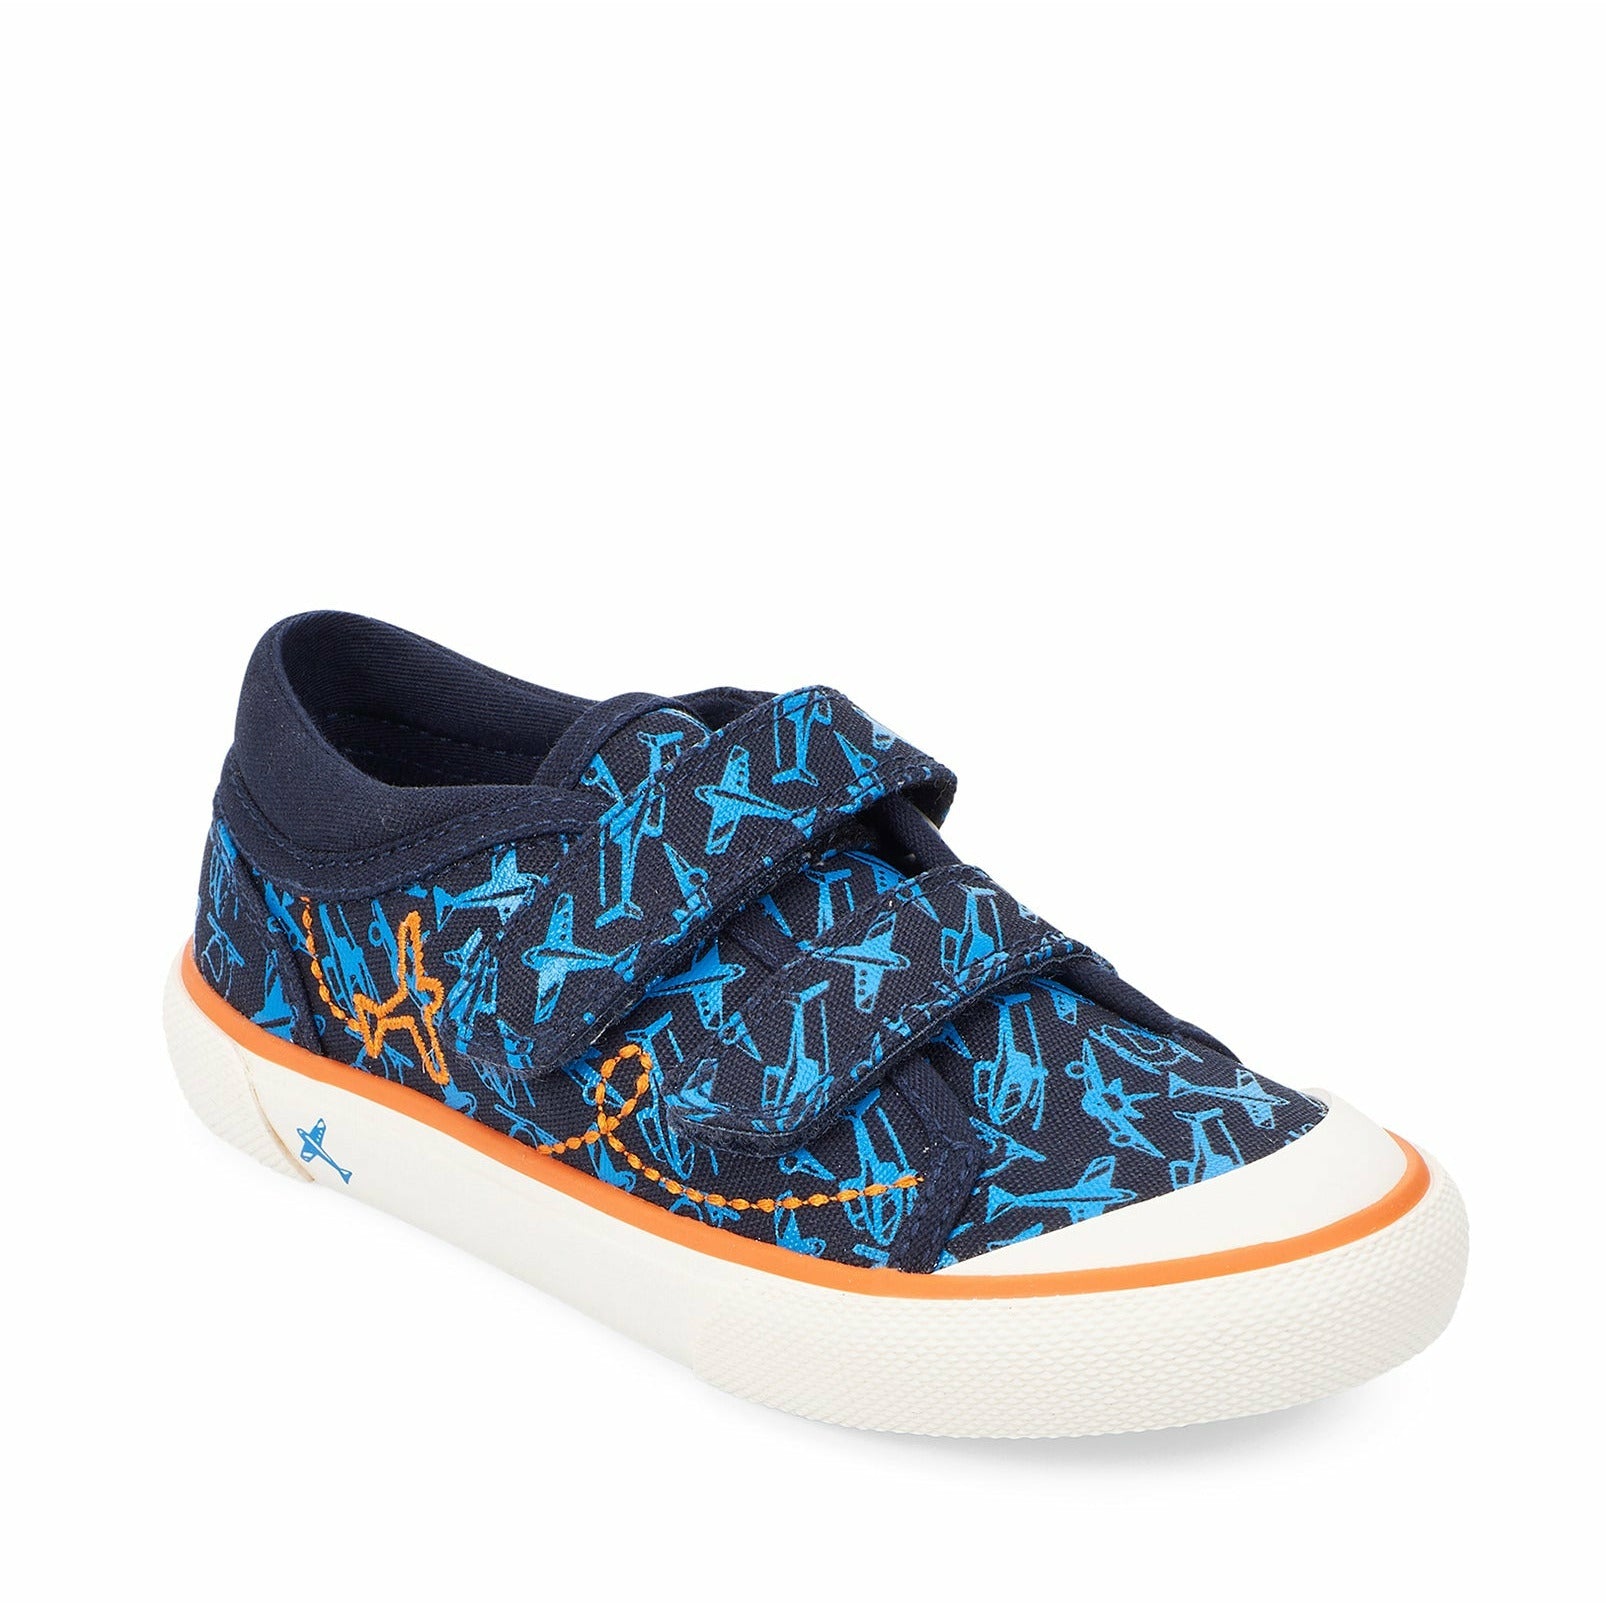 Start-Rite Zoom 6188 - Boys Canvas in Navy with Aeroplane Print | Start-Rite Shoes | Personal Shoe Fitting Service | Wisemans | Bantry | West Cork | Munster | Ireland